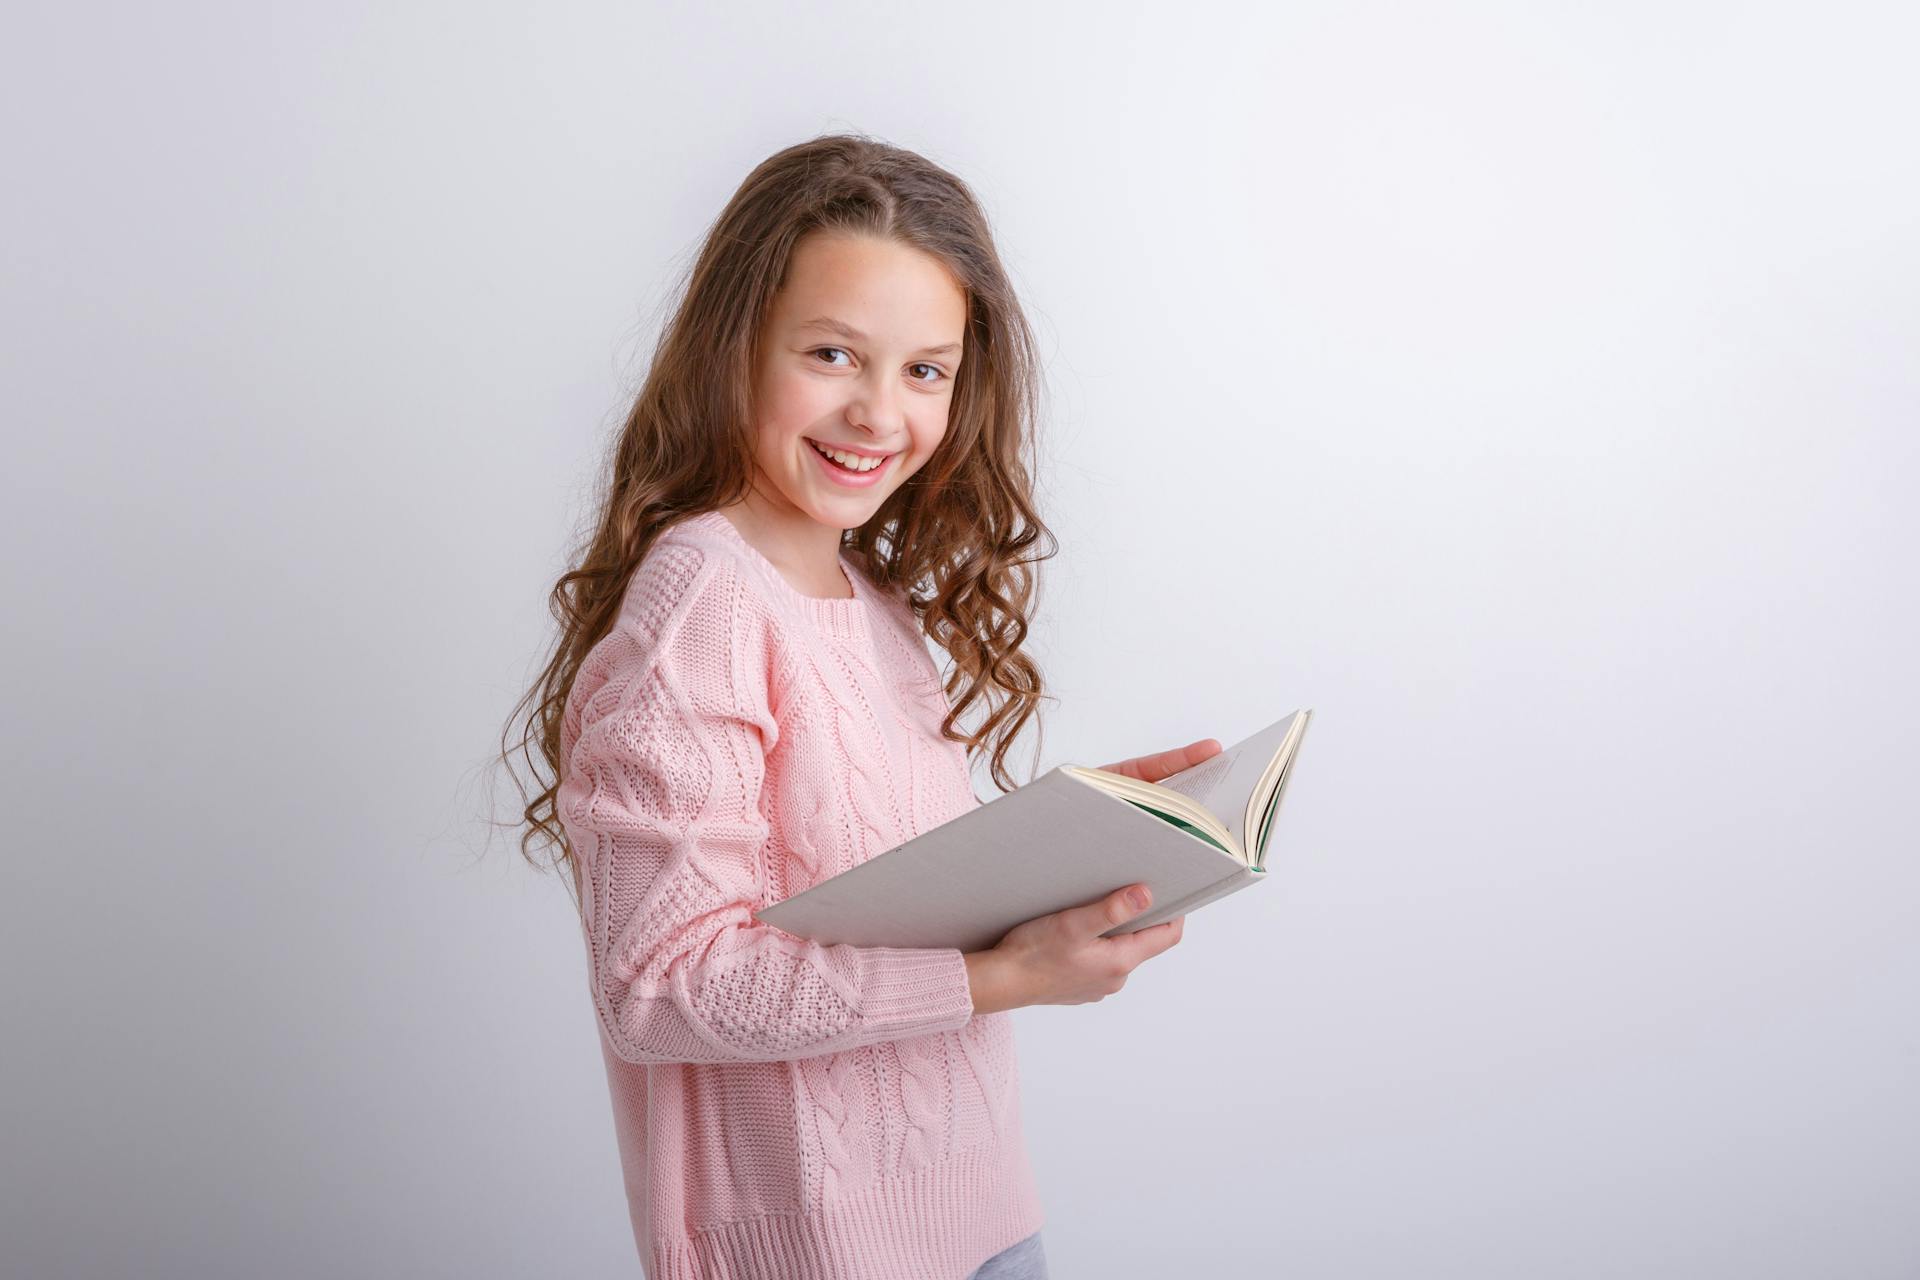 Older children's reading milestones by age reading age 8-12